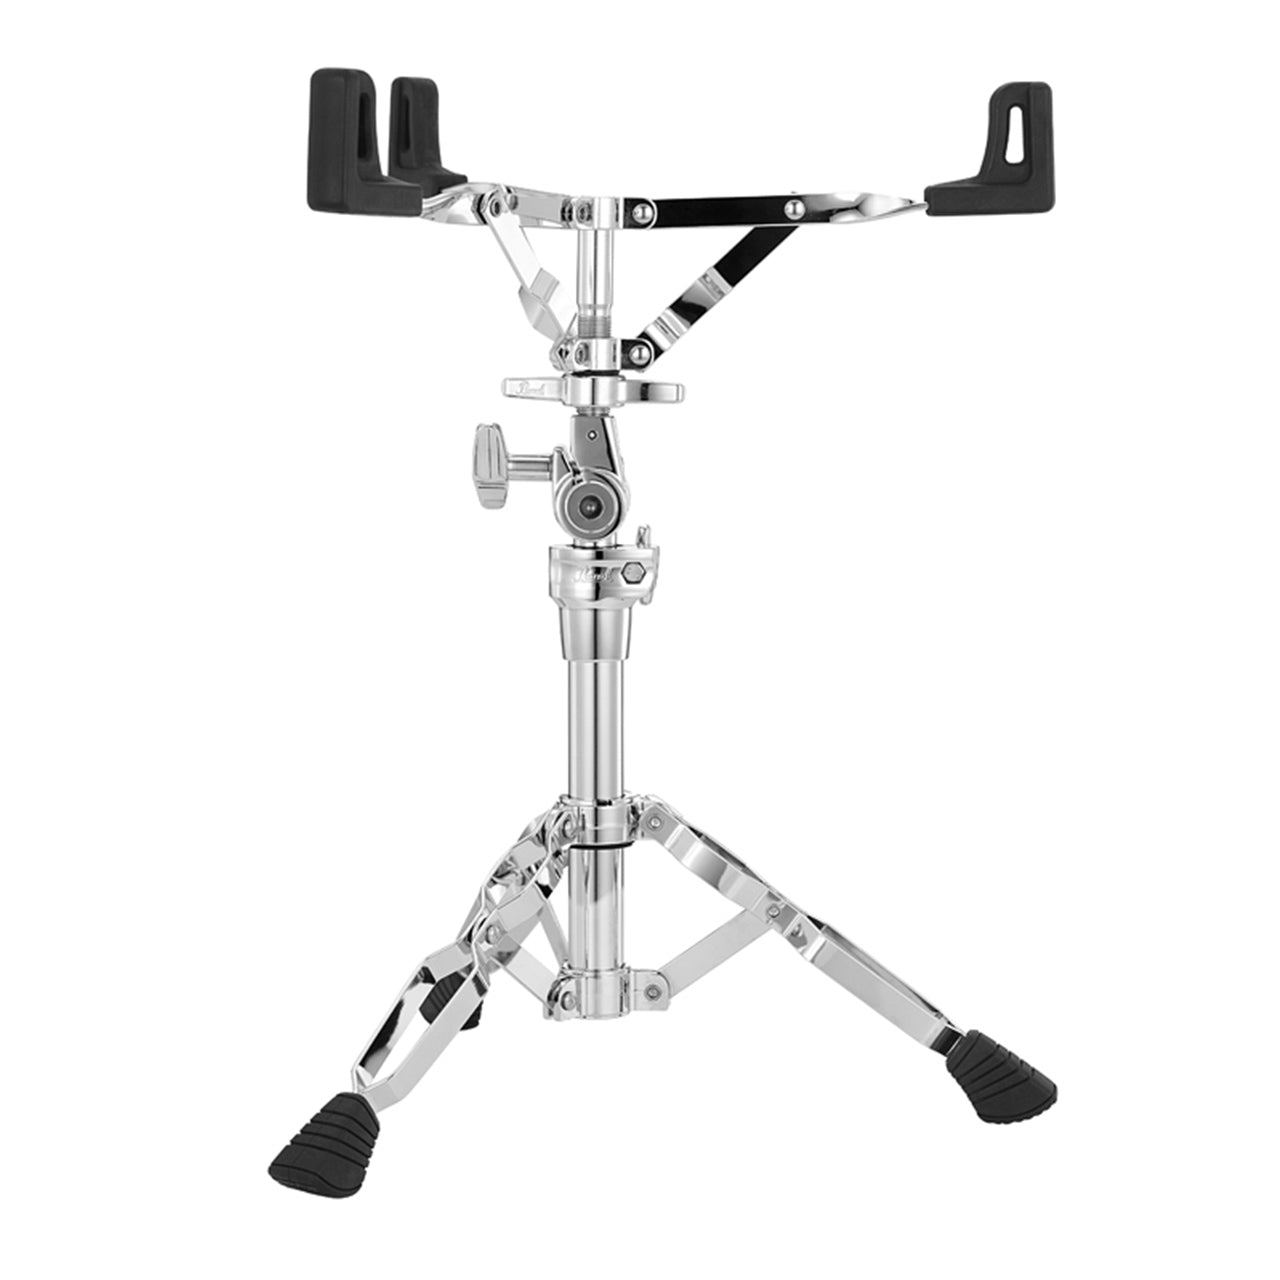 Pearl S930 Snare Drum Stand Adjustable with Double Braced Tripod Legs, Rubber Feet, Uni-Lock Tilter for 10 to 14 inch Drums Holder Basket